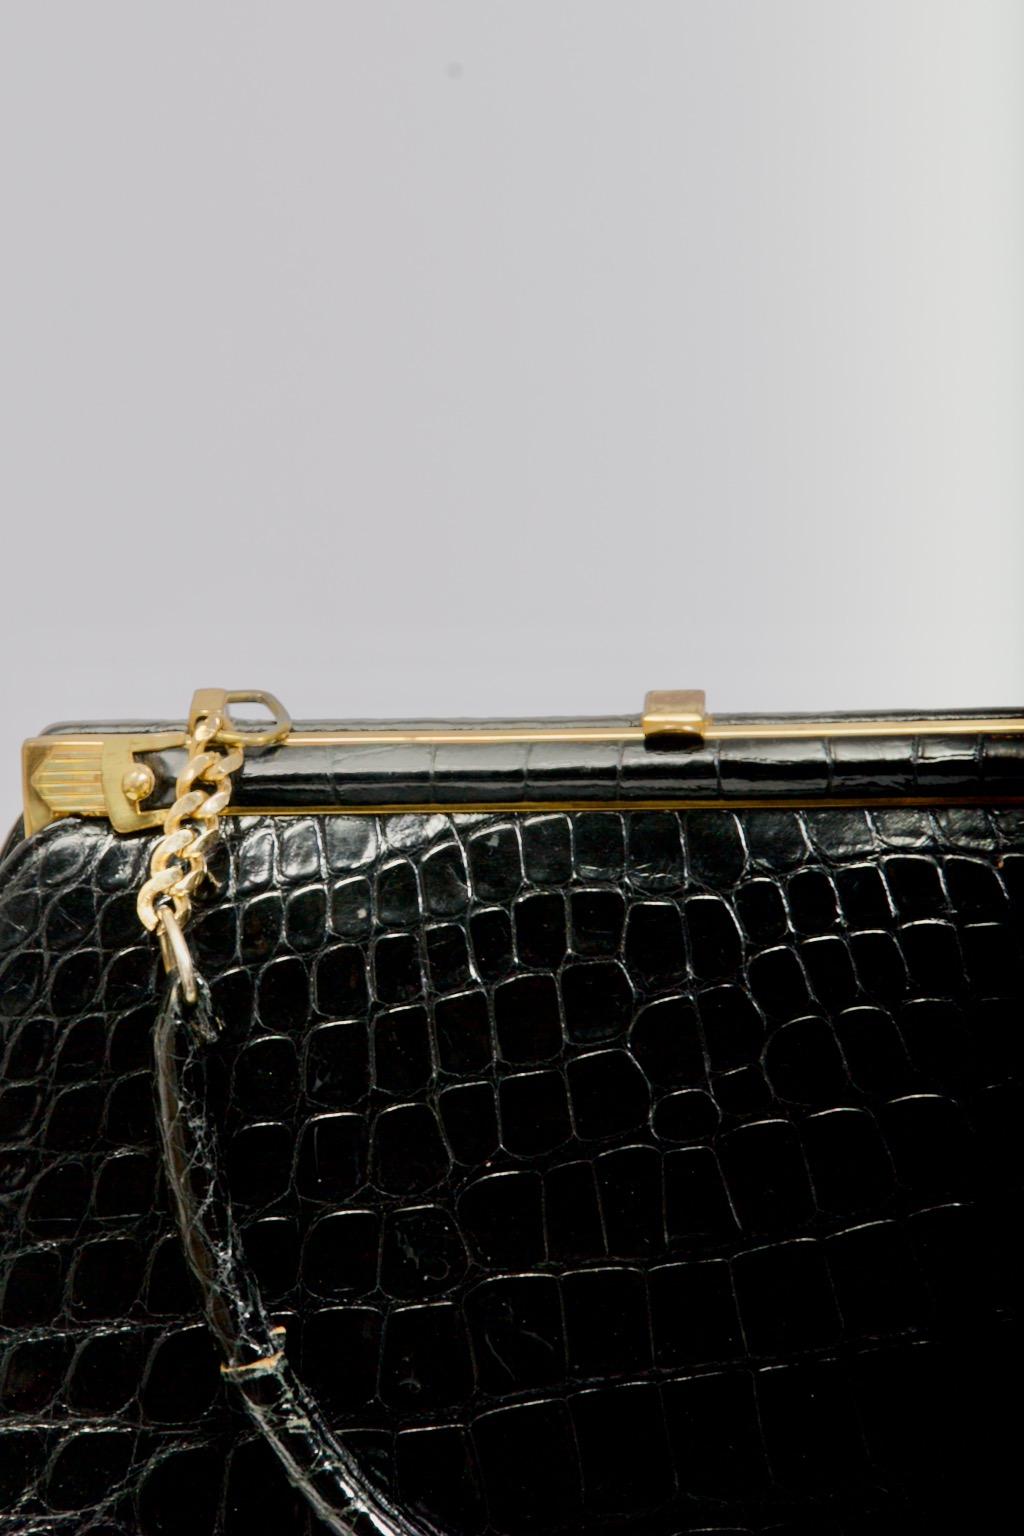 Classic vintage black alligator handbag features gold tone hardware and a single handle attached to the frame with a 5-link chain on each end. The interior is black leather with side compartments and fabric tag marked 